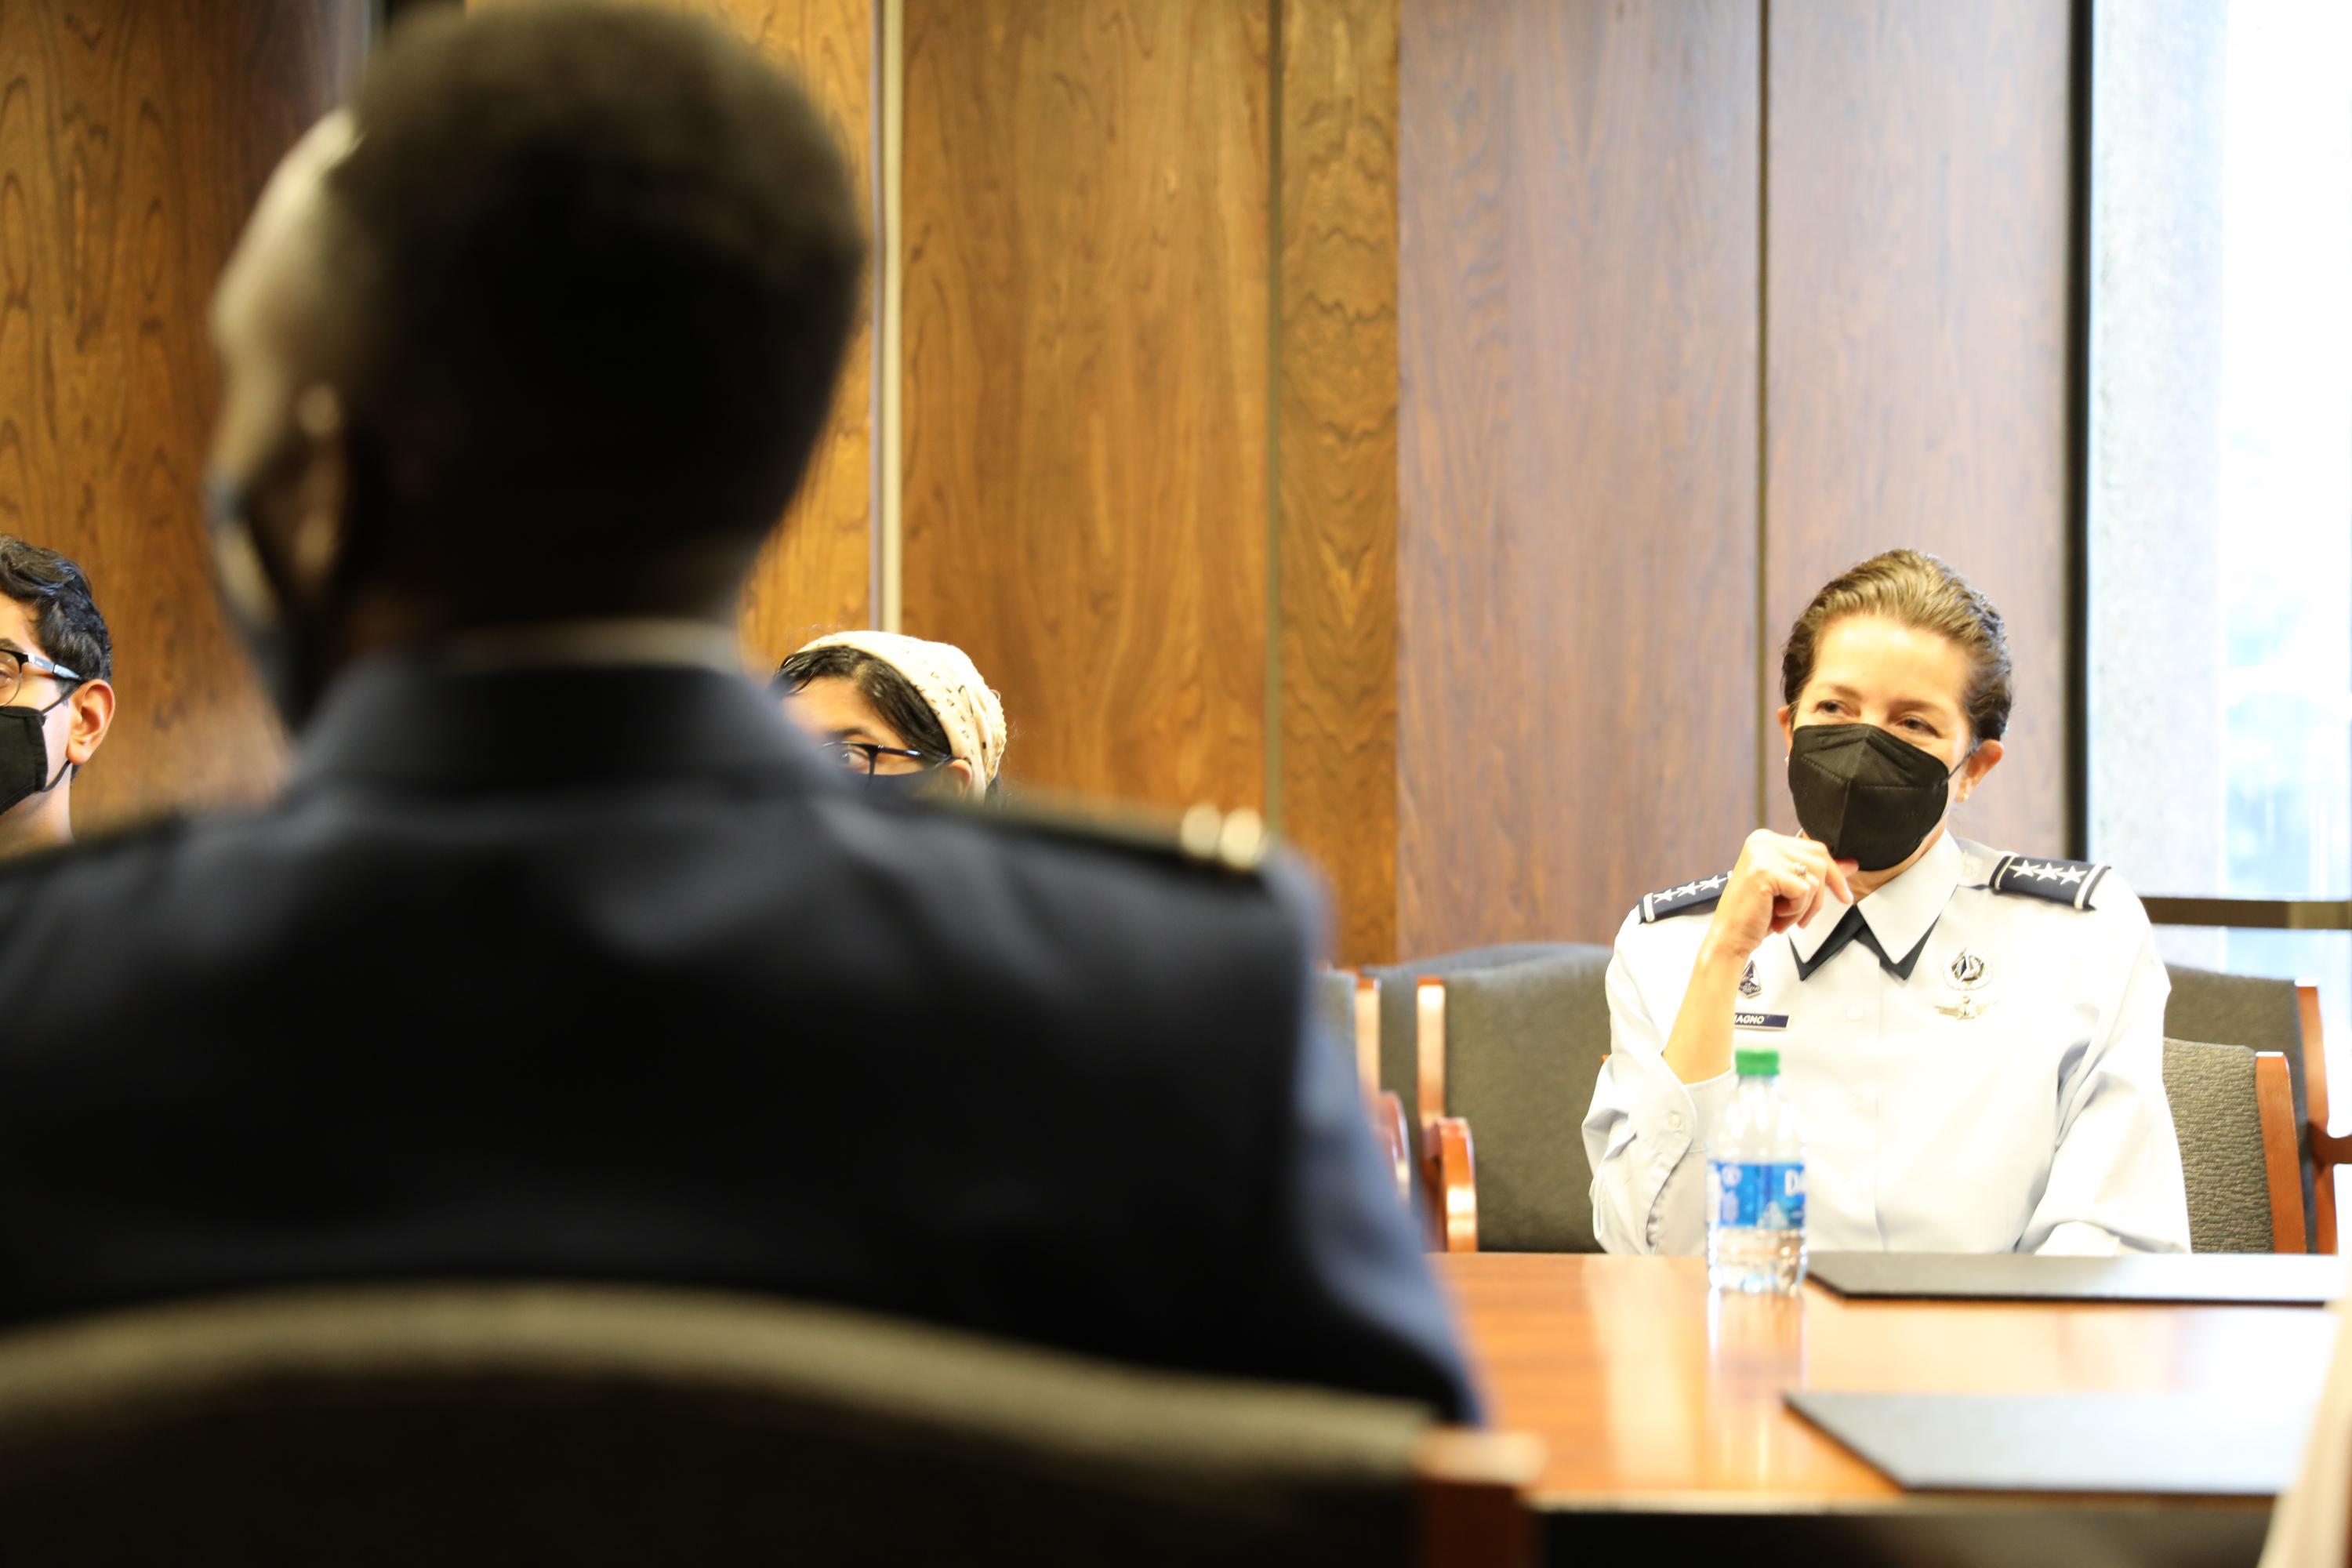 Lt. General Nina Armagno met with aerospace engineering students to discuss their current research projects and talk about the future of the U.S. Space Force.